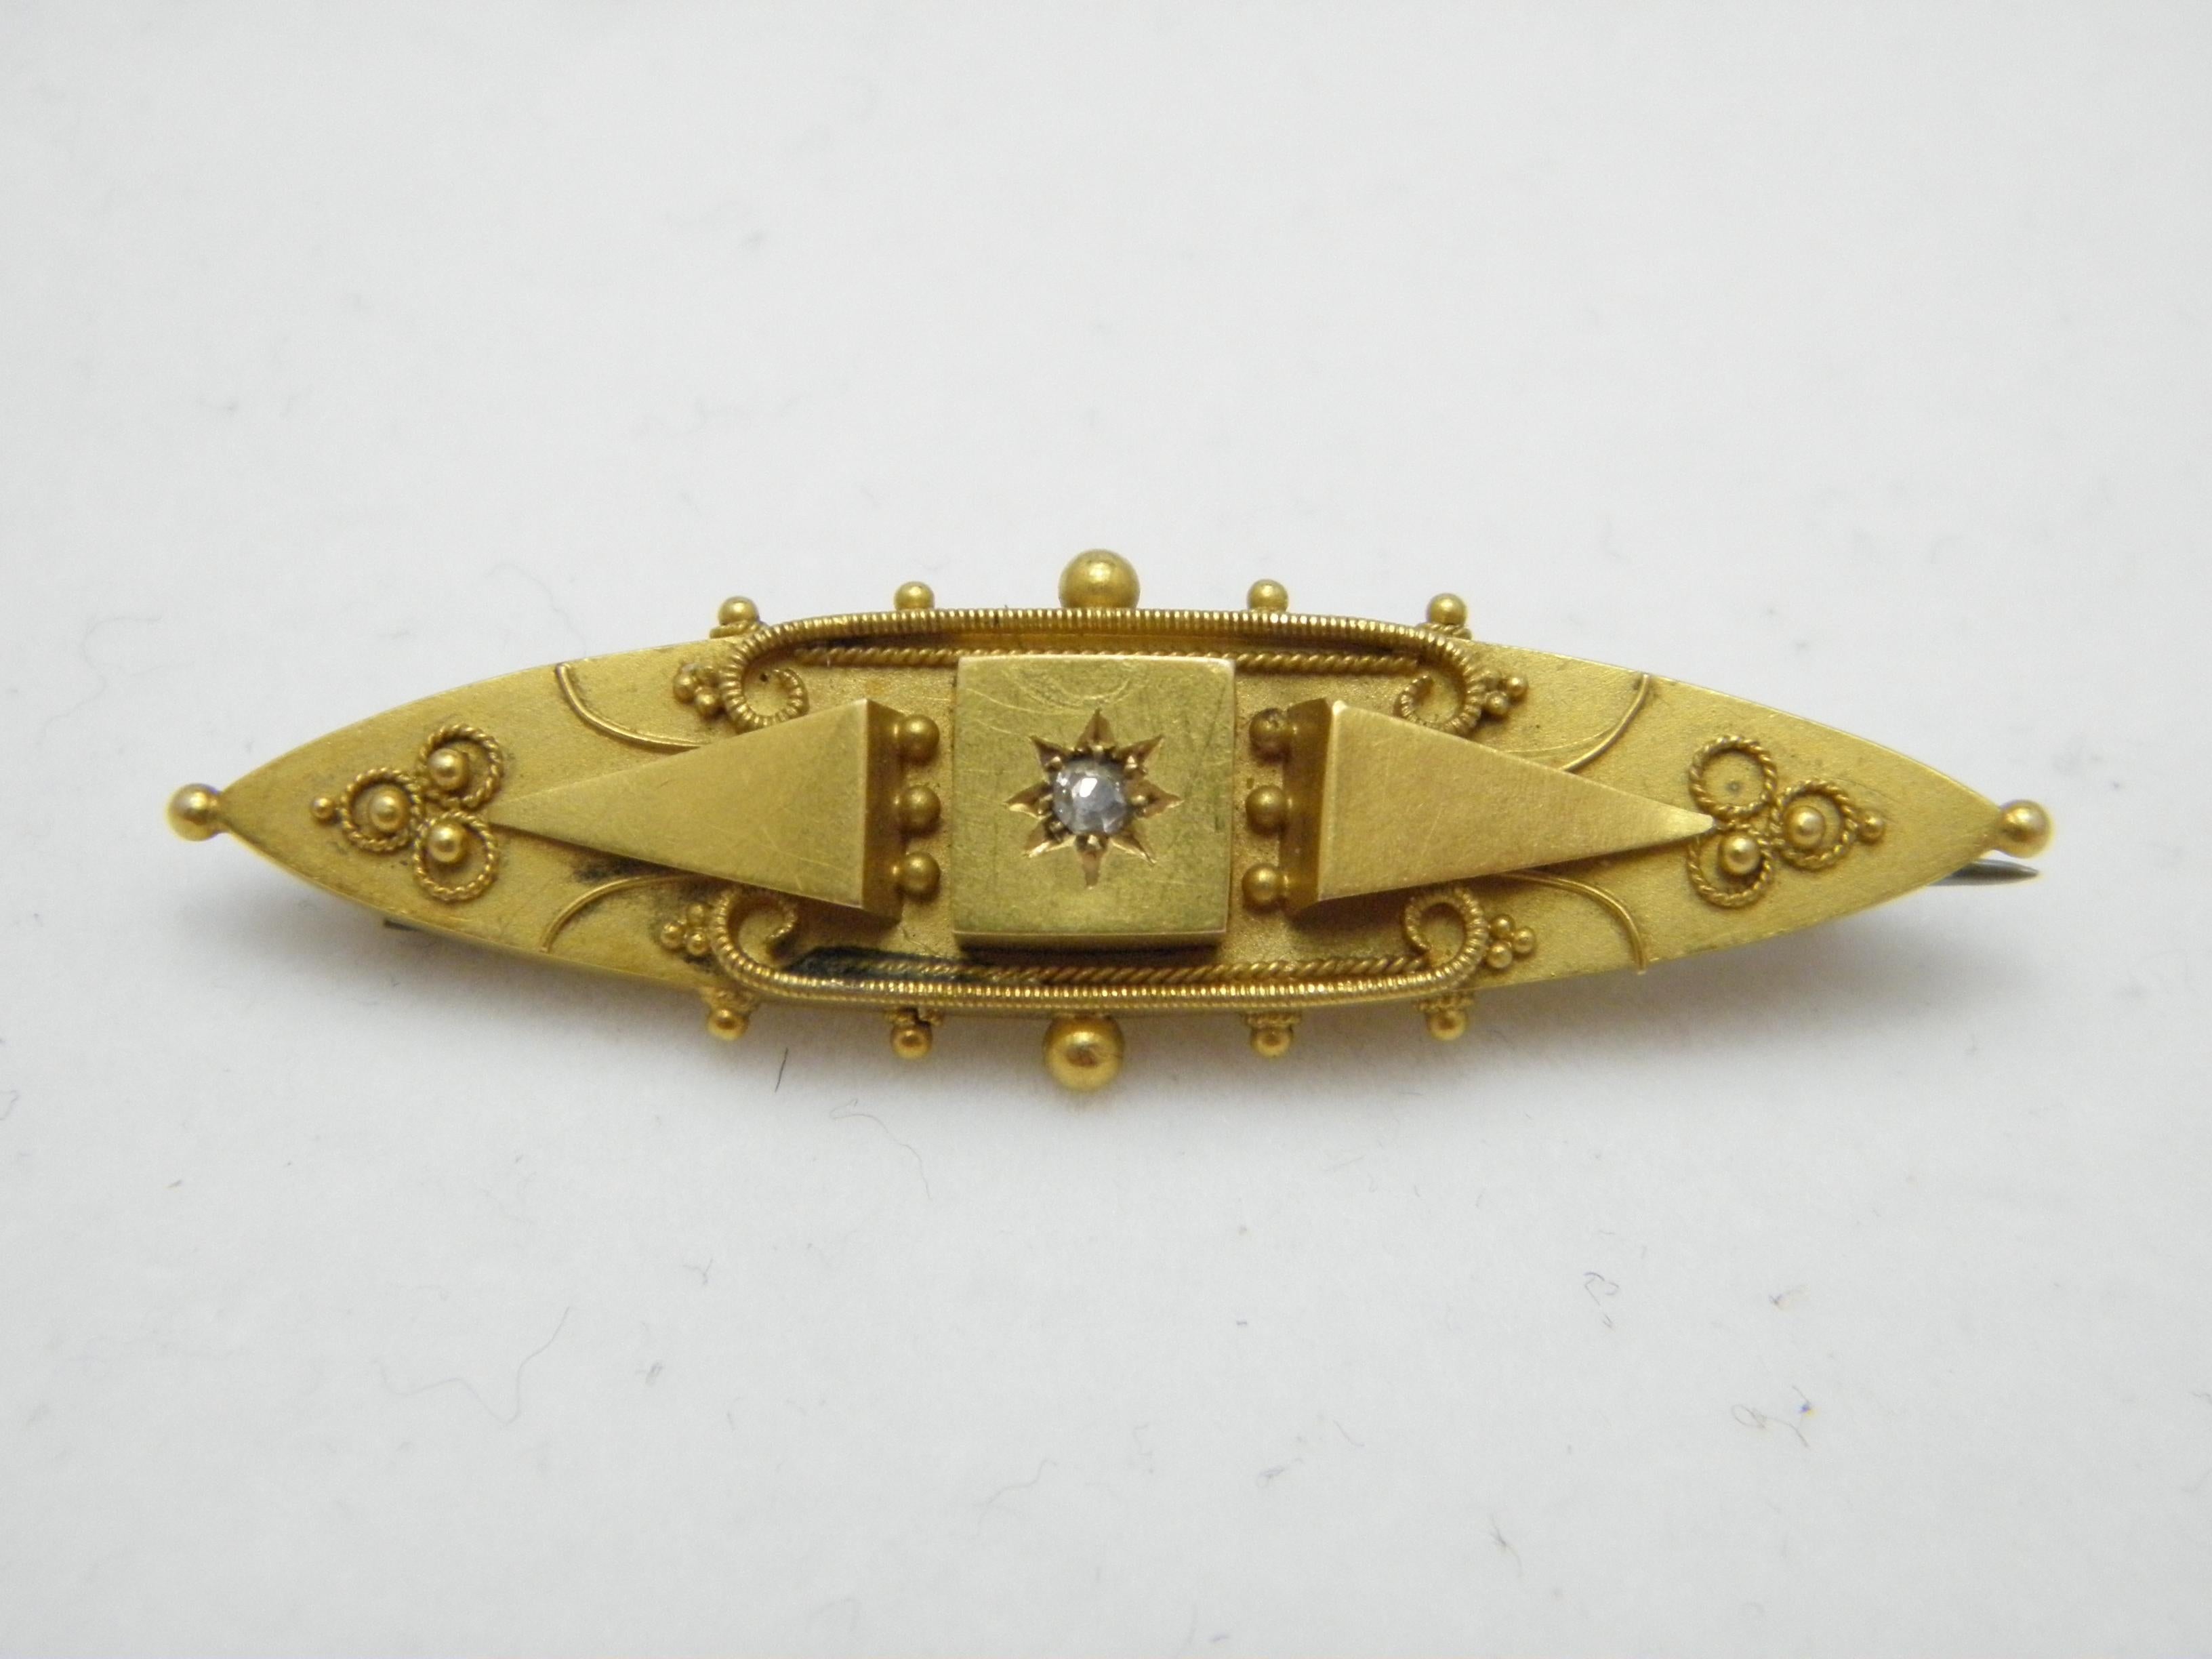 If you have landed on this page then you have an eye for beauty.

On offer is this stunning

15CT SOLID GOLD DETAILED DIAMOND BAR BROOCH

DETAILS
Material: 15ct (625/000) Solid Heavy Yellow Gold
Style: Victorian classic brooch / pin in the bar style